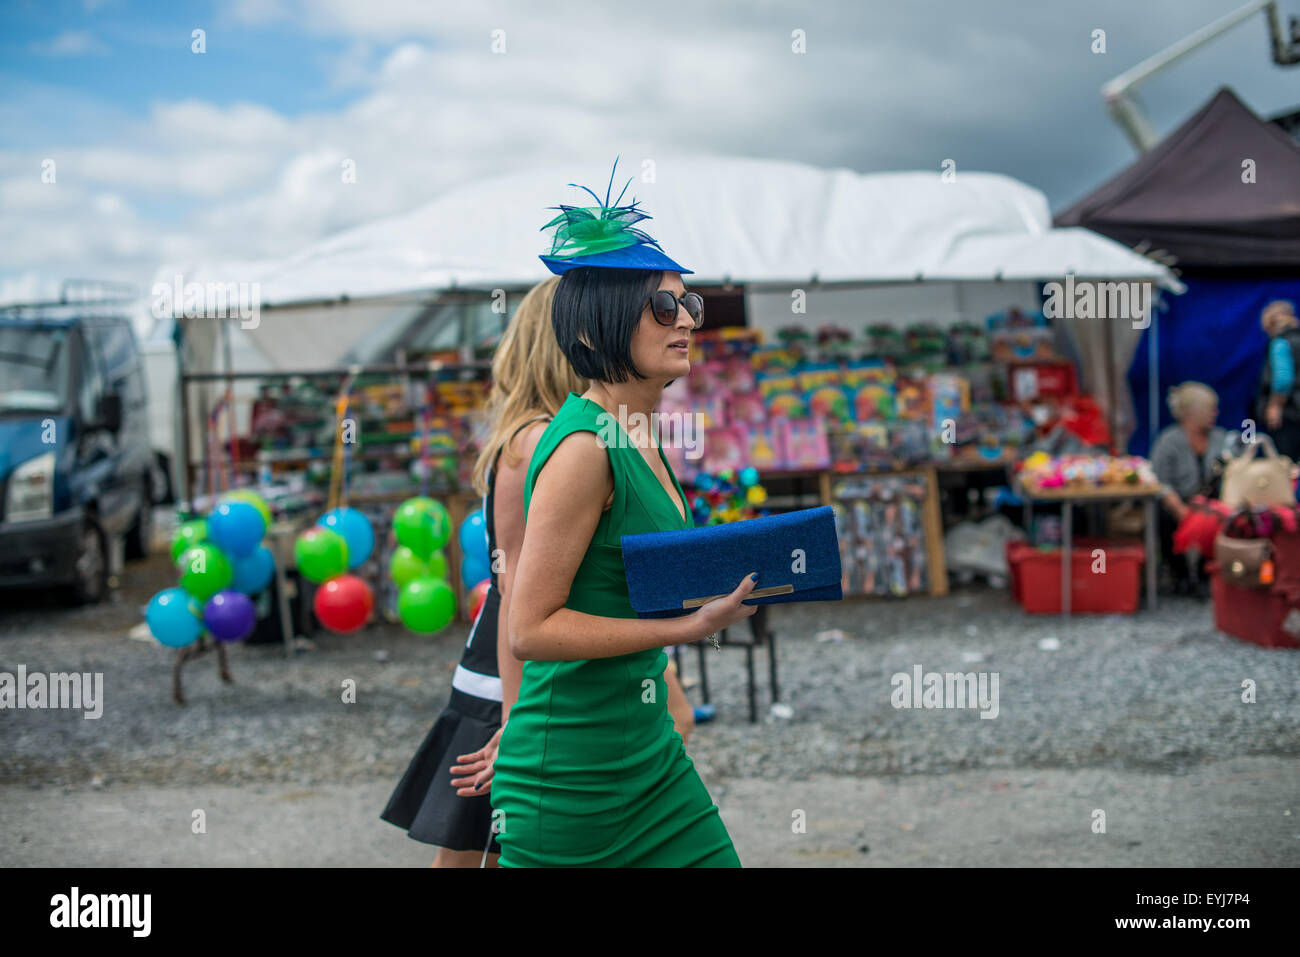 Galway, Ireland. 30th July, 2015. Widely renowned as ""˜Ladies Day' at the Galway Festival, Thursday combines the very best in racing and fashion for the pinnacle of the summer racing calendar. This is the richest National Hunt race in Ireland ""“ run over a distance of two miles with the prize fund of â‚¬300,000. © Velar Grant/ZUMA Wire/Alamy Live News Stock Photo